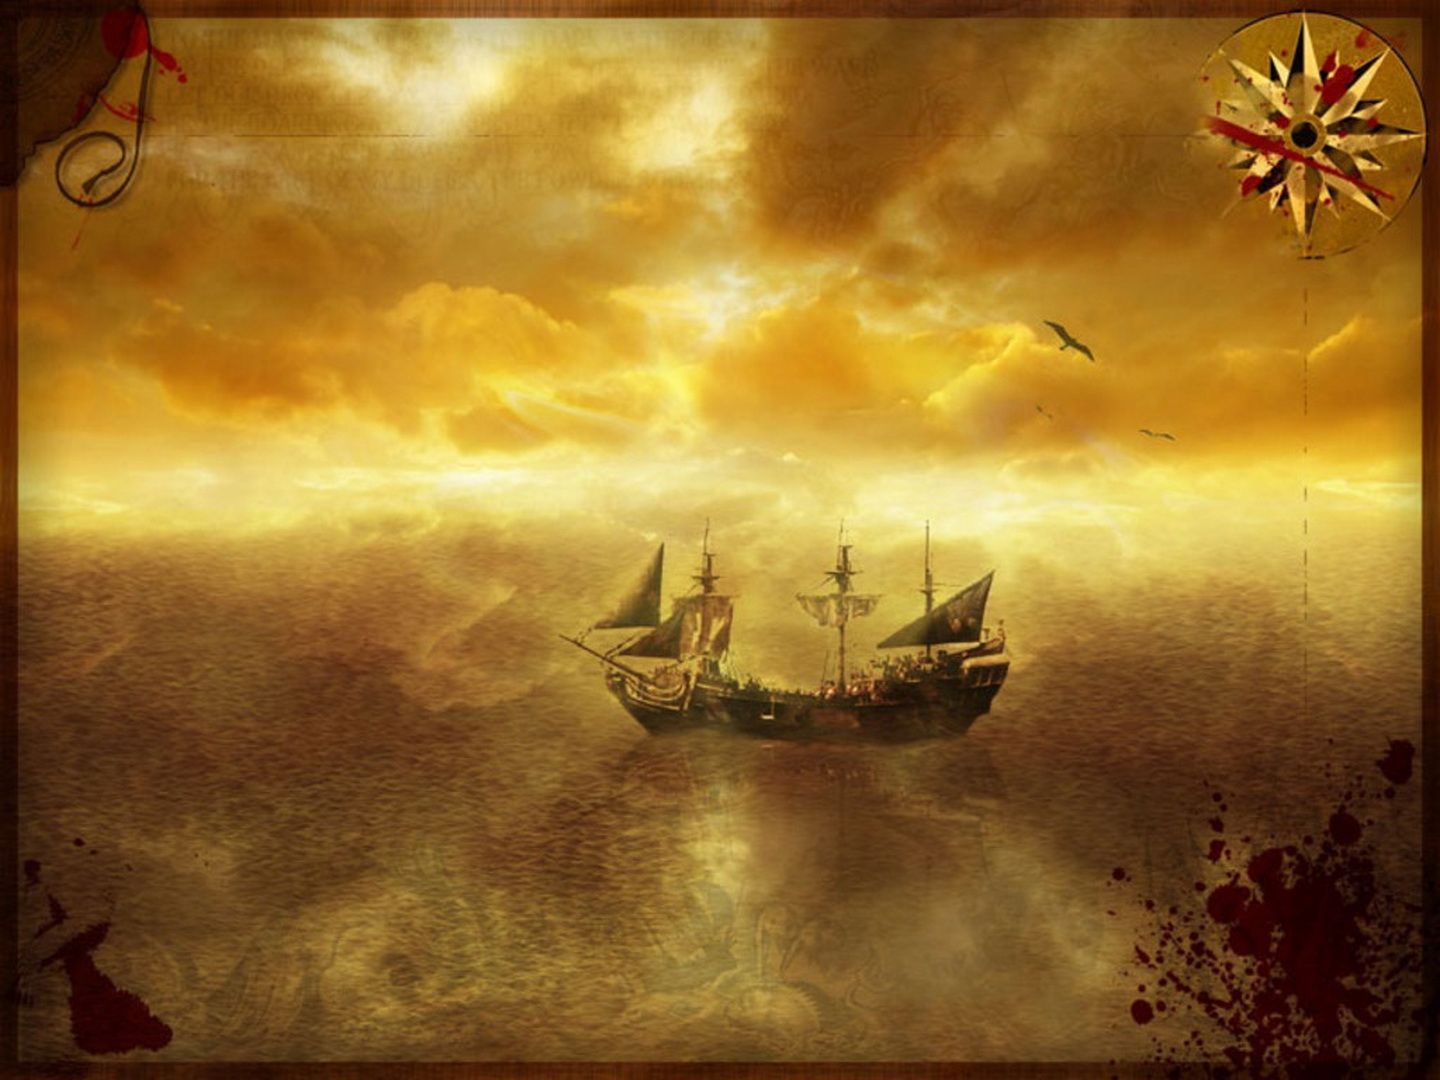 Wallpaperres.com | Pirate Ship Backgrounds 05